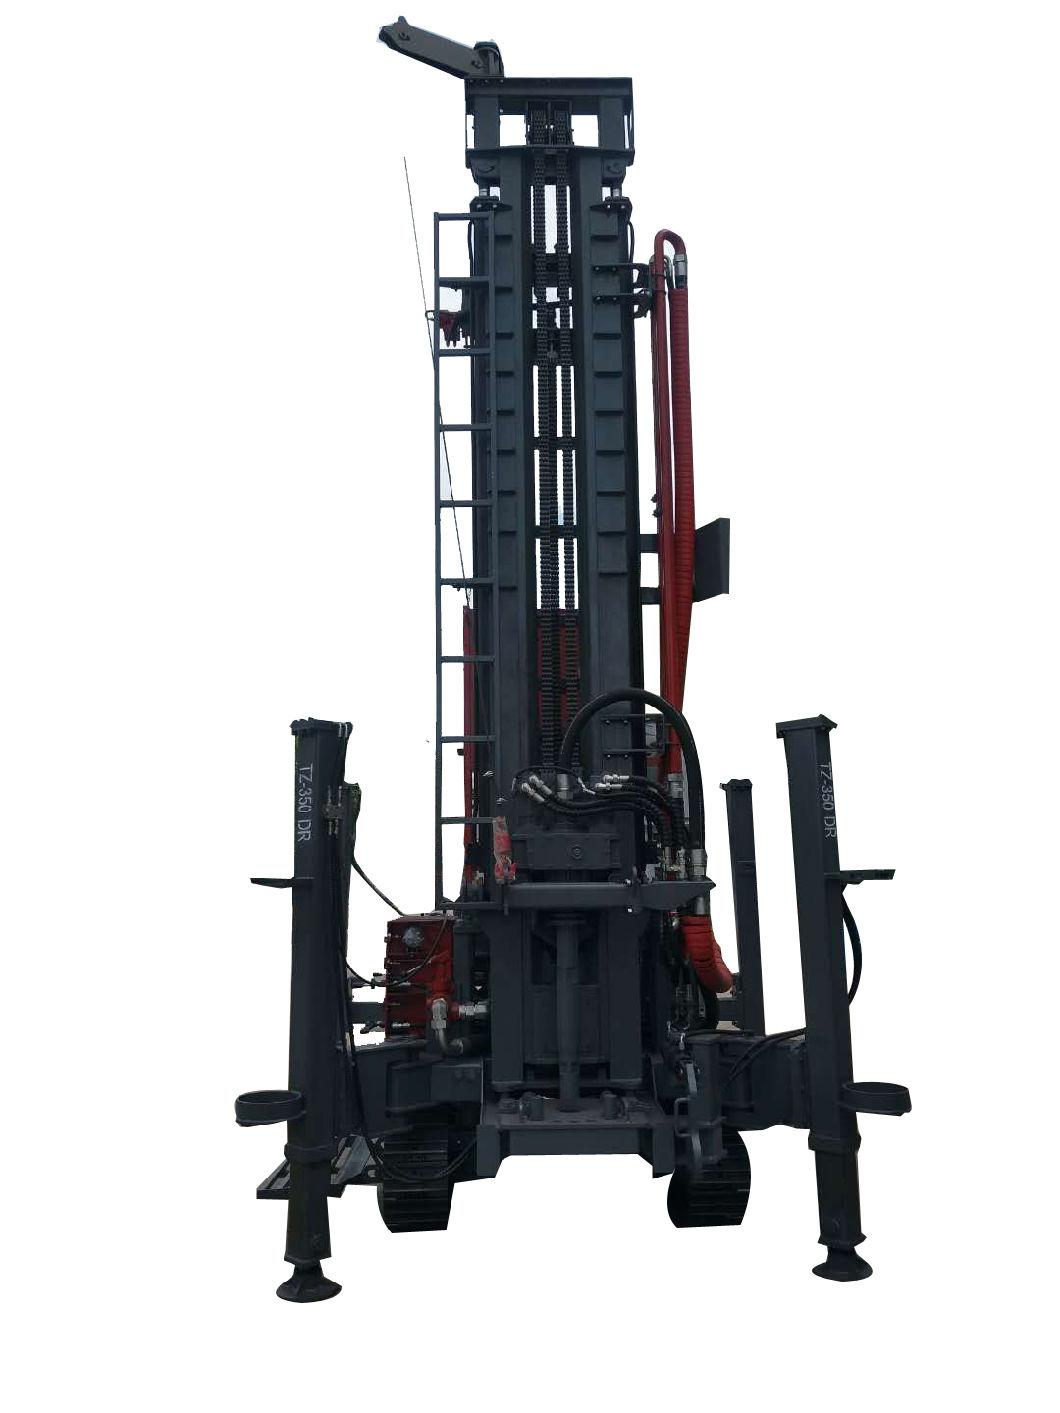 260m Deep Multi-Function Hydraulic DTH Water Well Drilling Rig